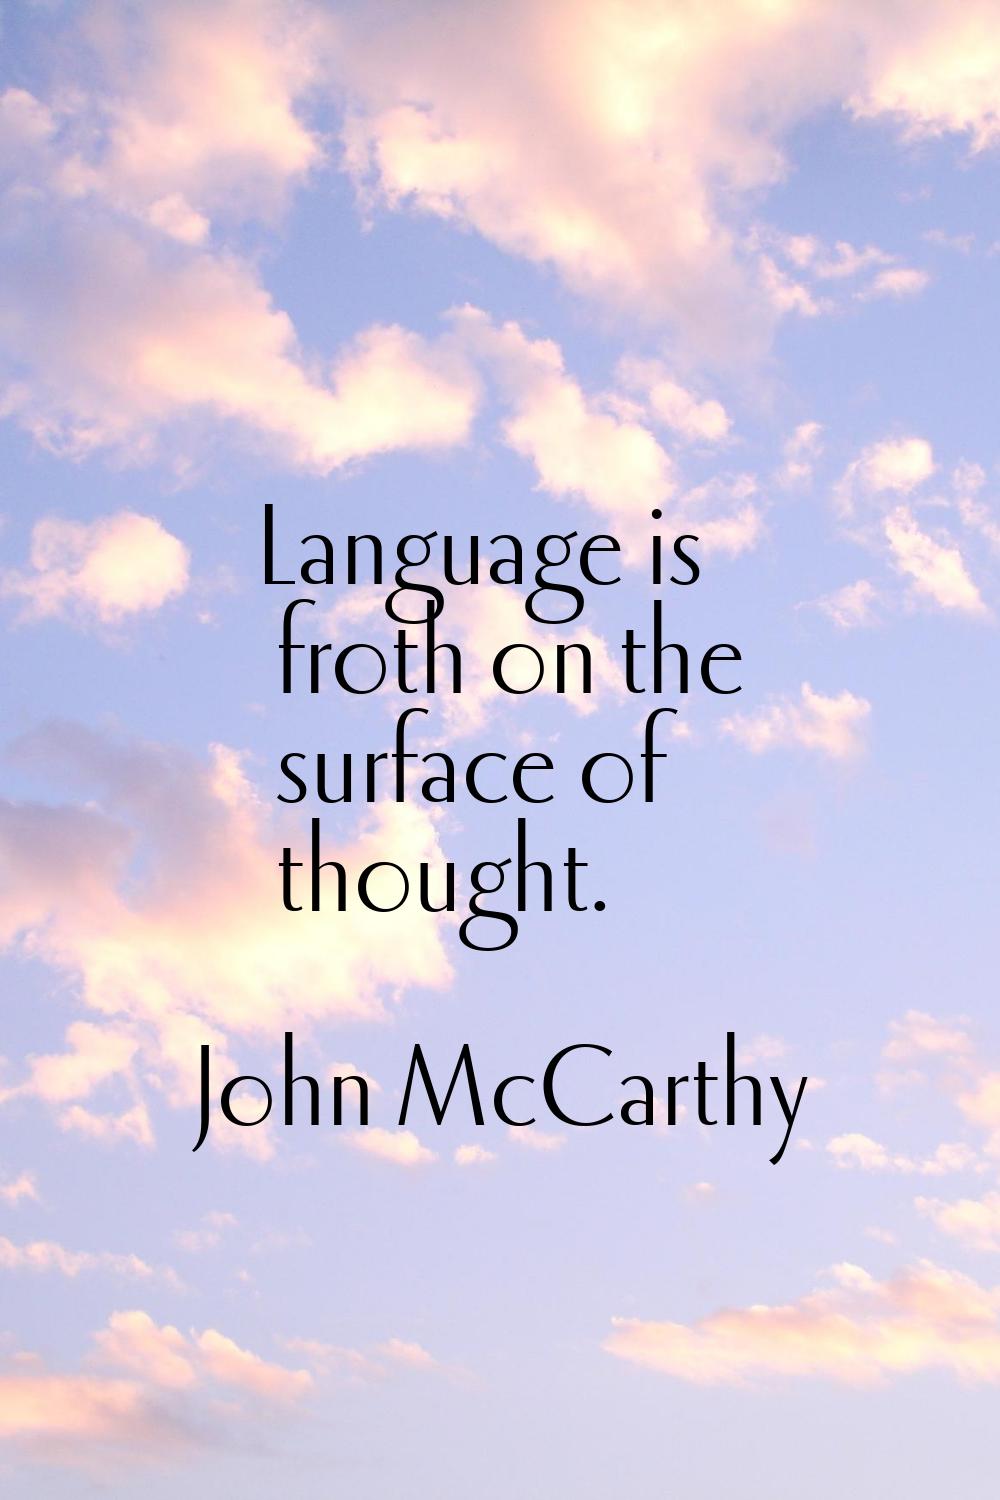 Language is froth on the surface of thought.